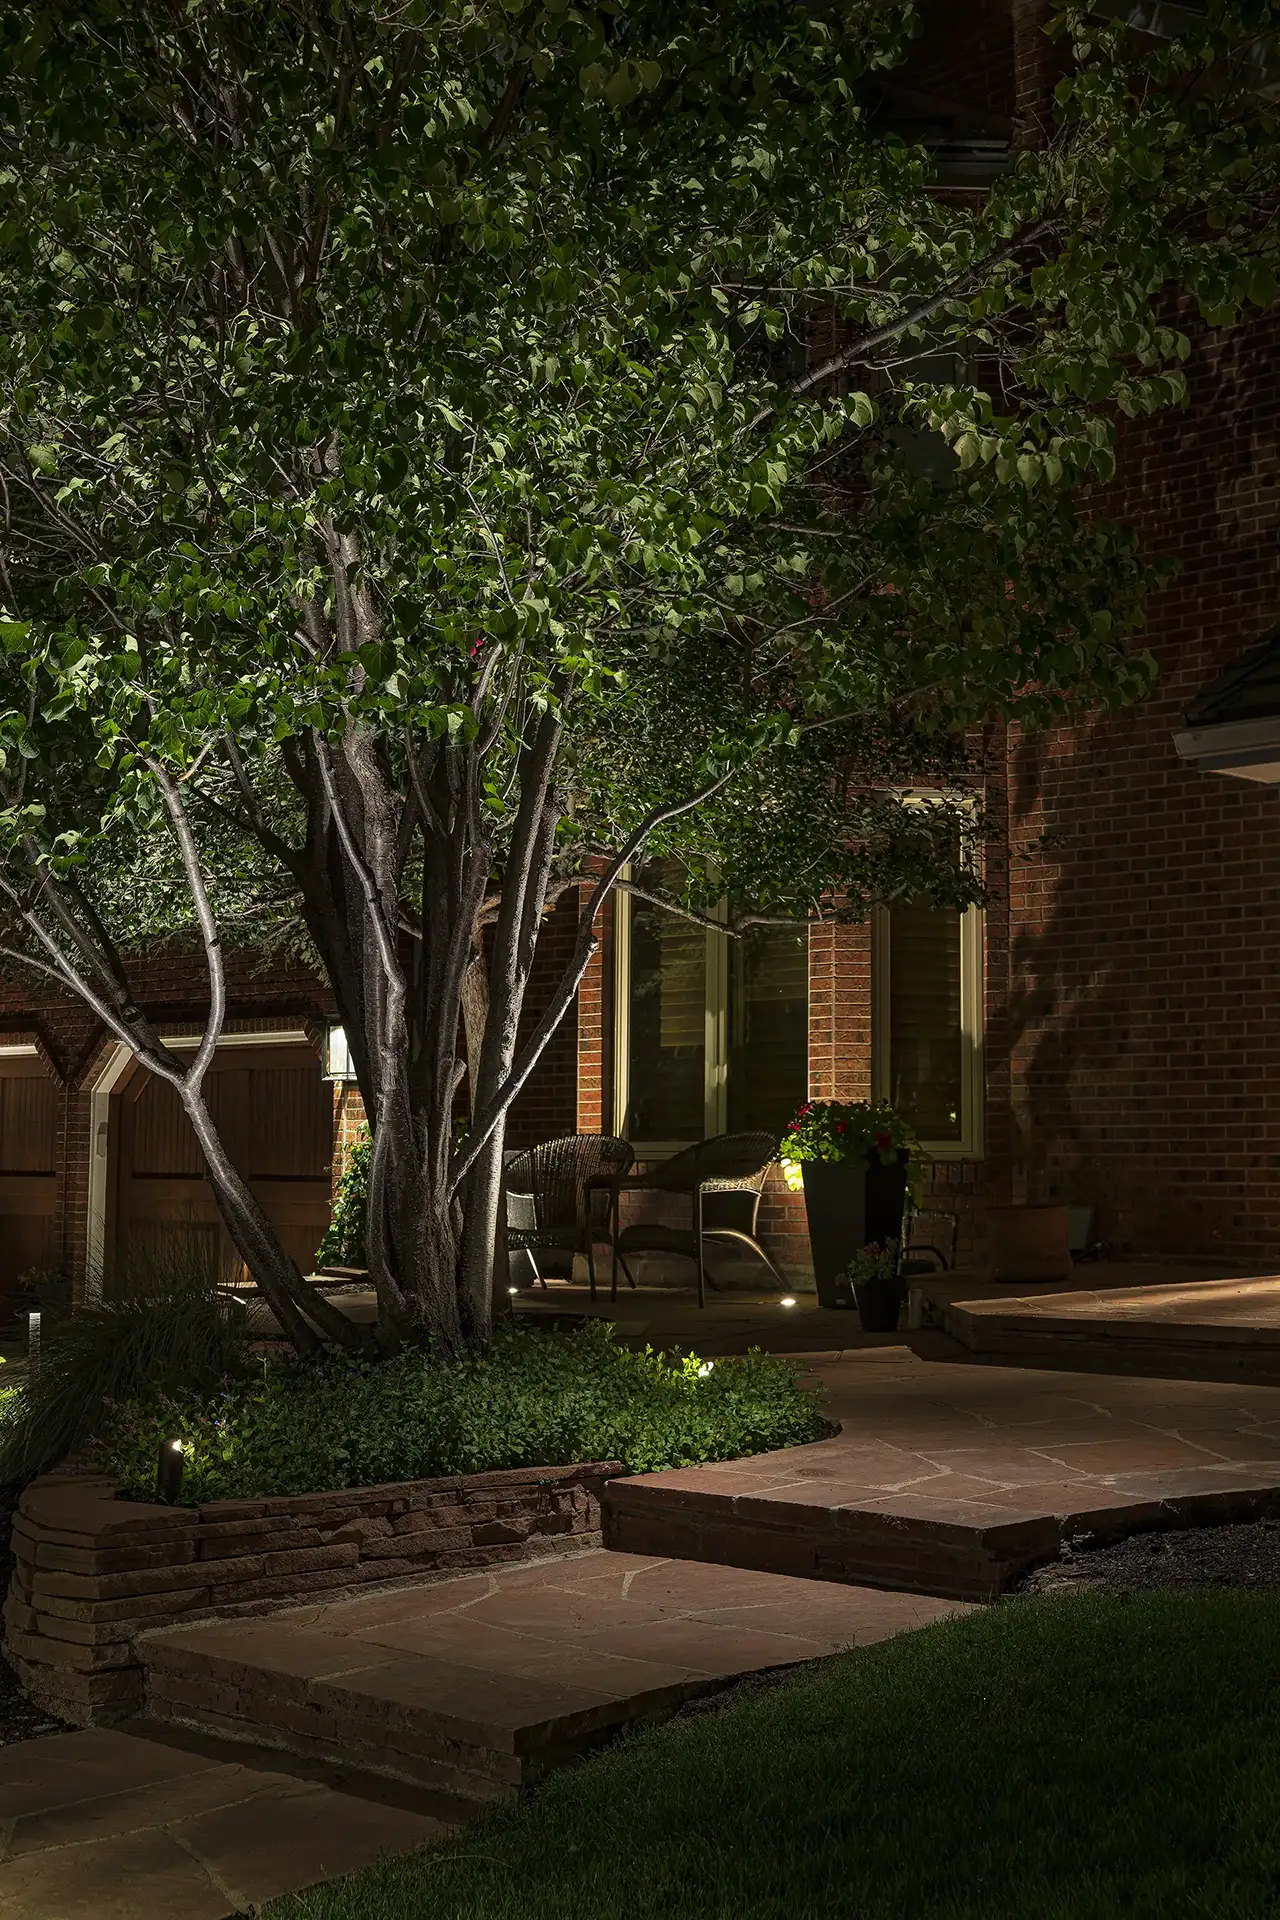 Durham St image 2 pendant over steps path walkway Lighthouse Outdoor Lighting and Audio Denver CO